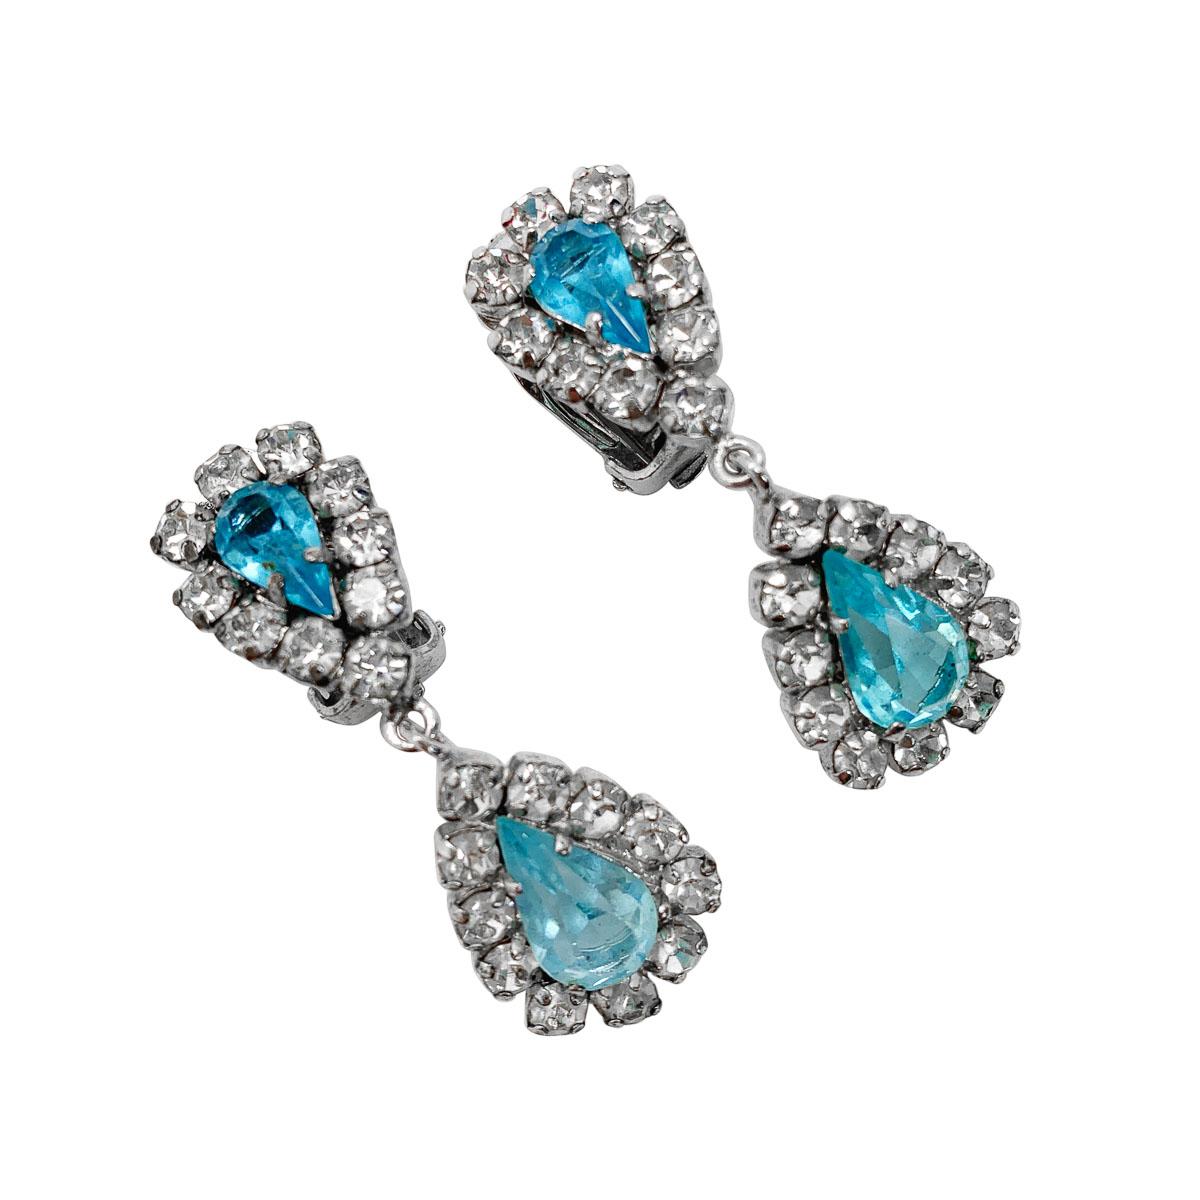 Delicate and feminine vintage Dior Aqua Earrings. Featuring beautiful aqua crystals in teardrop cuts with white chaton halos.
With archive pieces from her own Dior collection displayed in London's highly acclaimed Dior Designer of Dreams Exhibition,